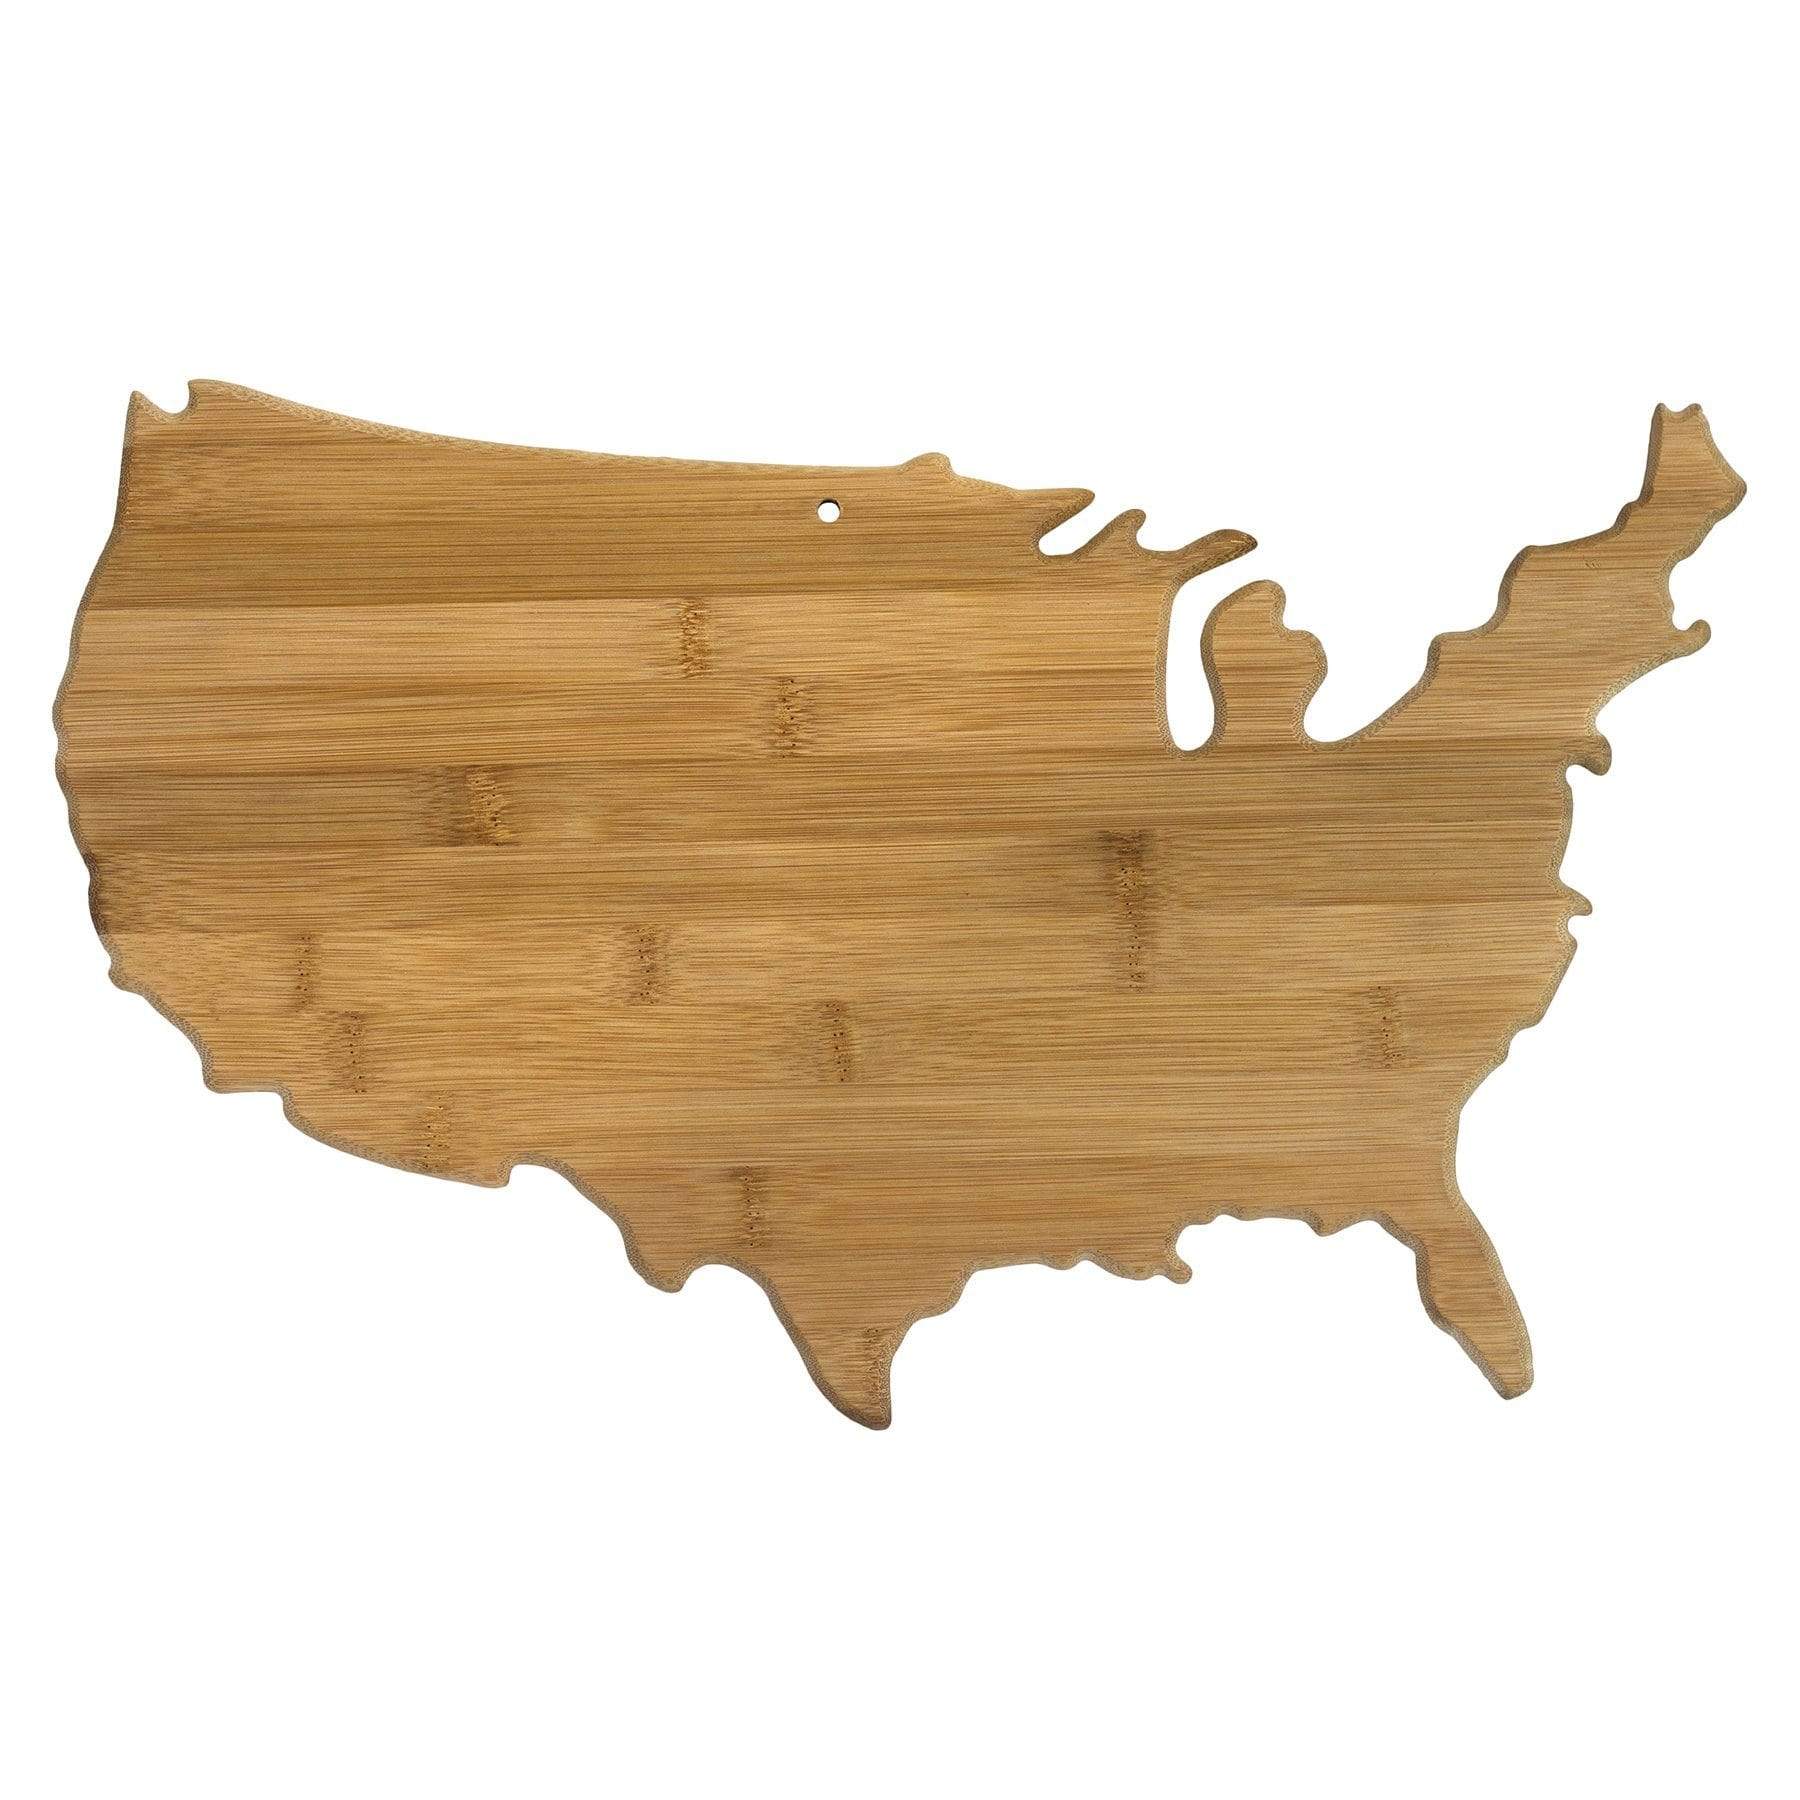 https://totallybamboo.com/cdn/shop/products/usa-shaped-bamboo-serving-and-cutting-board-totally-bamboo-704157.jpg?v=1628039211